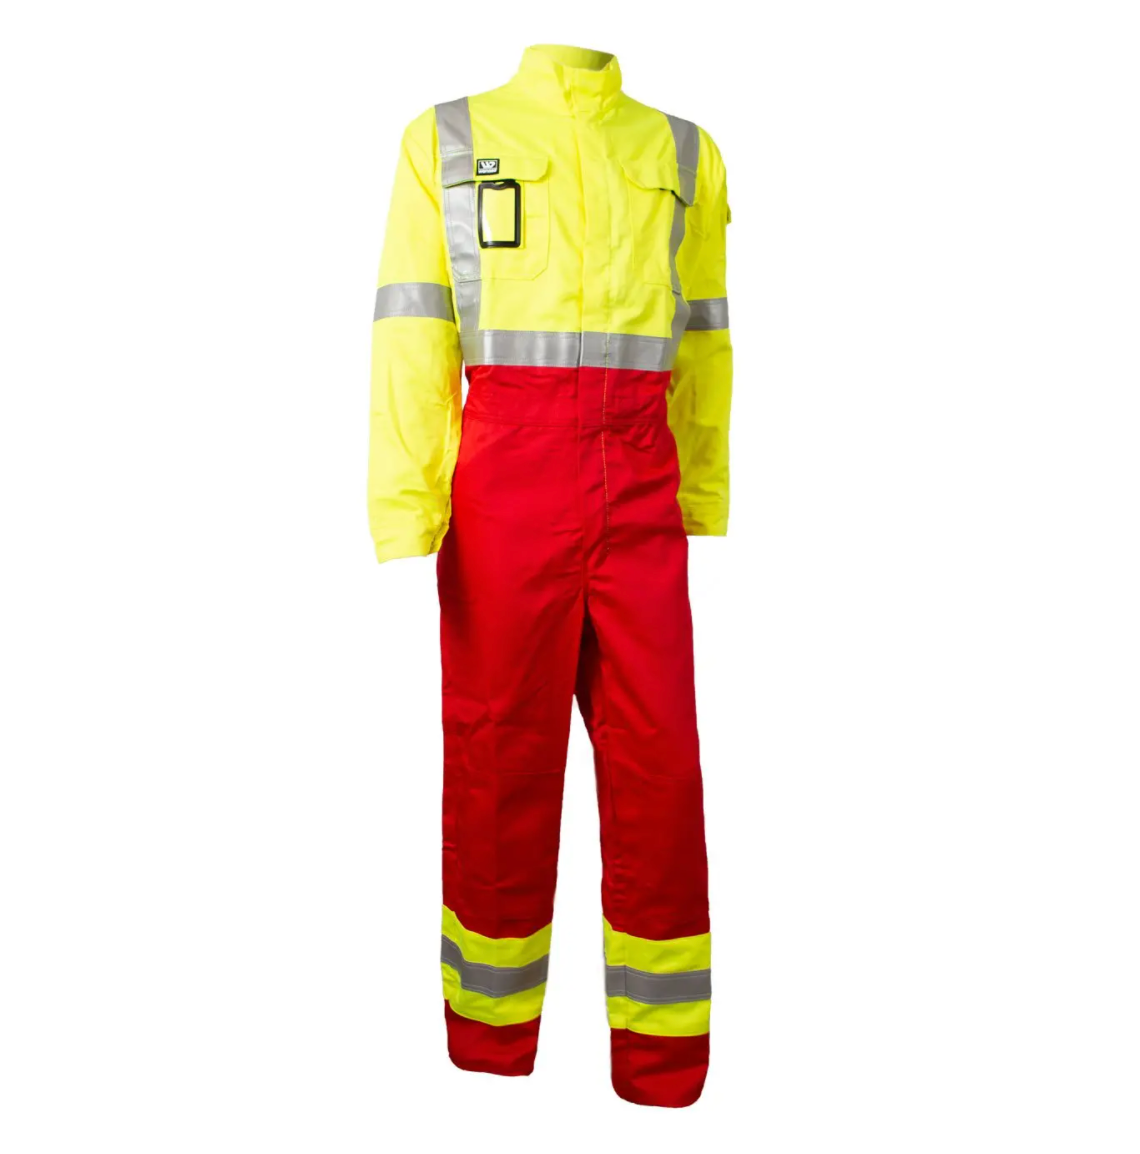 Wenaas Offshore Daletec FR Coverall | Red/Yellow | Sizes S - 4XL Flame Resistant Work Wear - Cleanflow